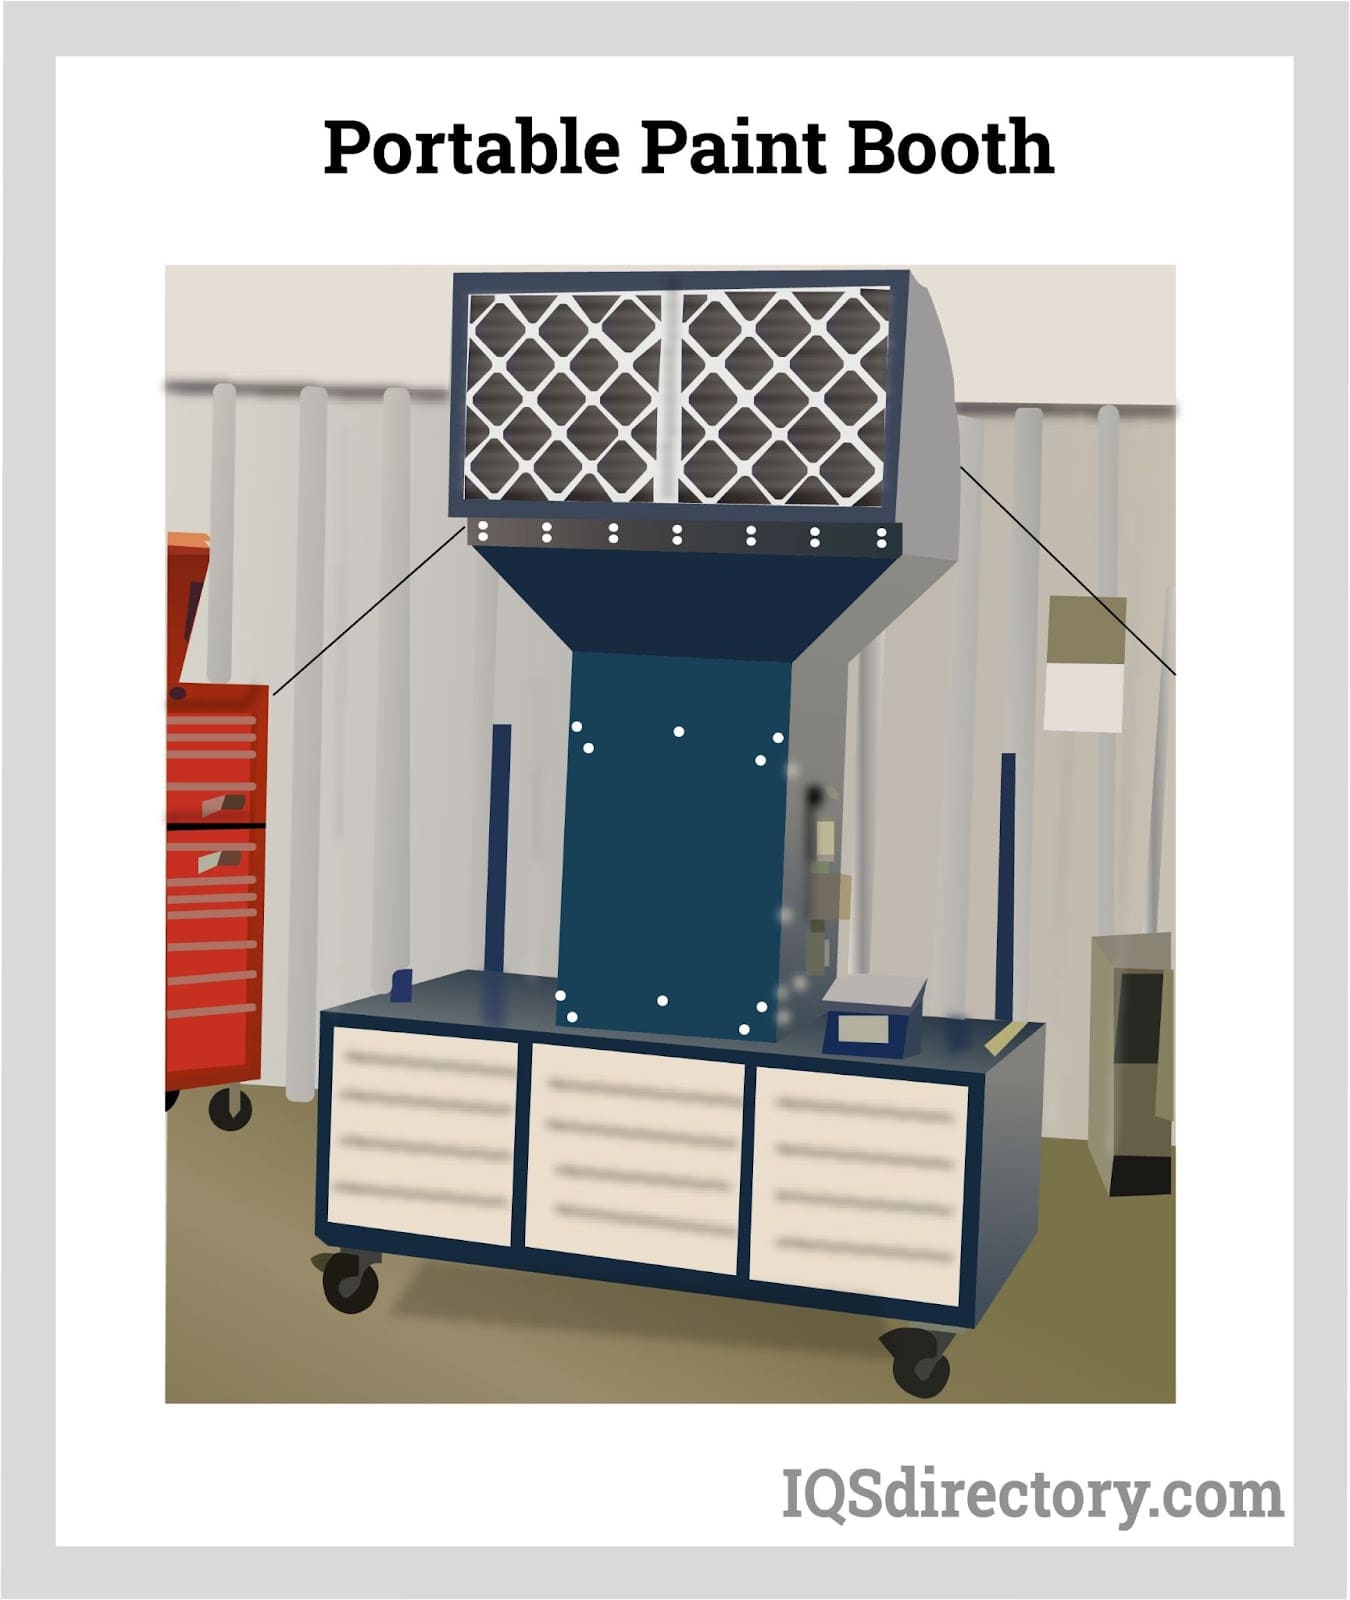 Portable Paint Booth